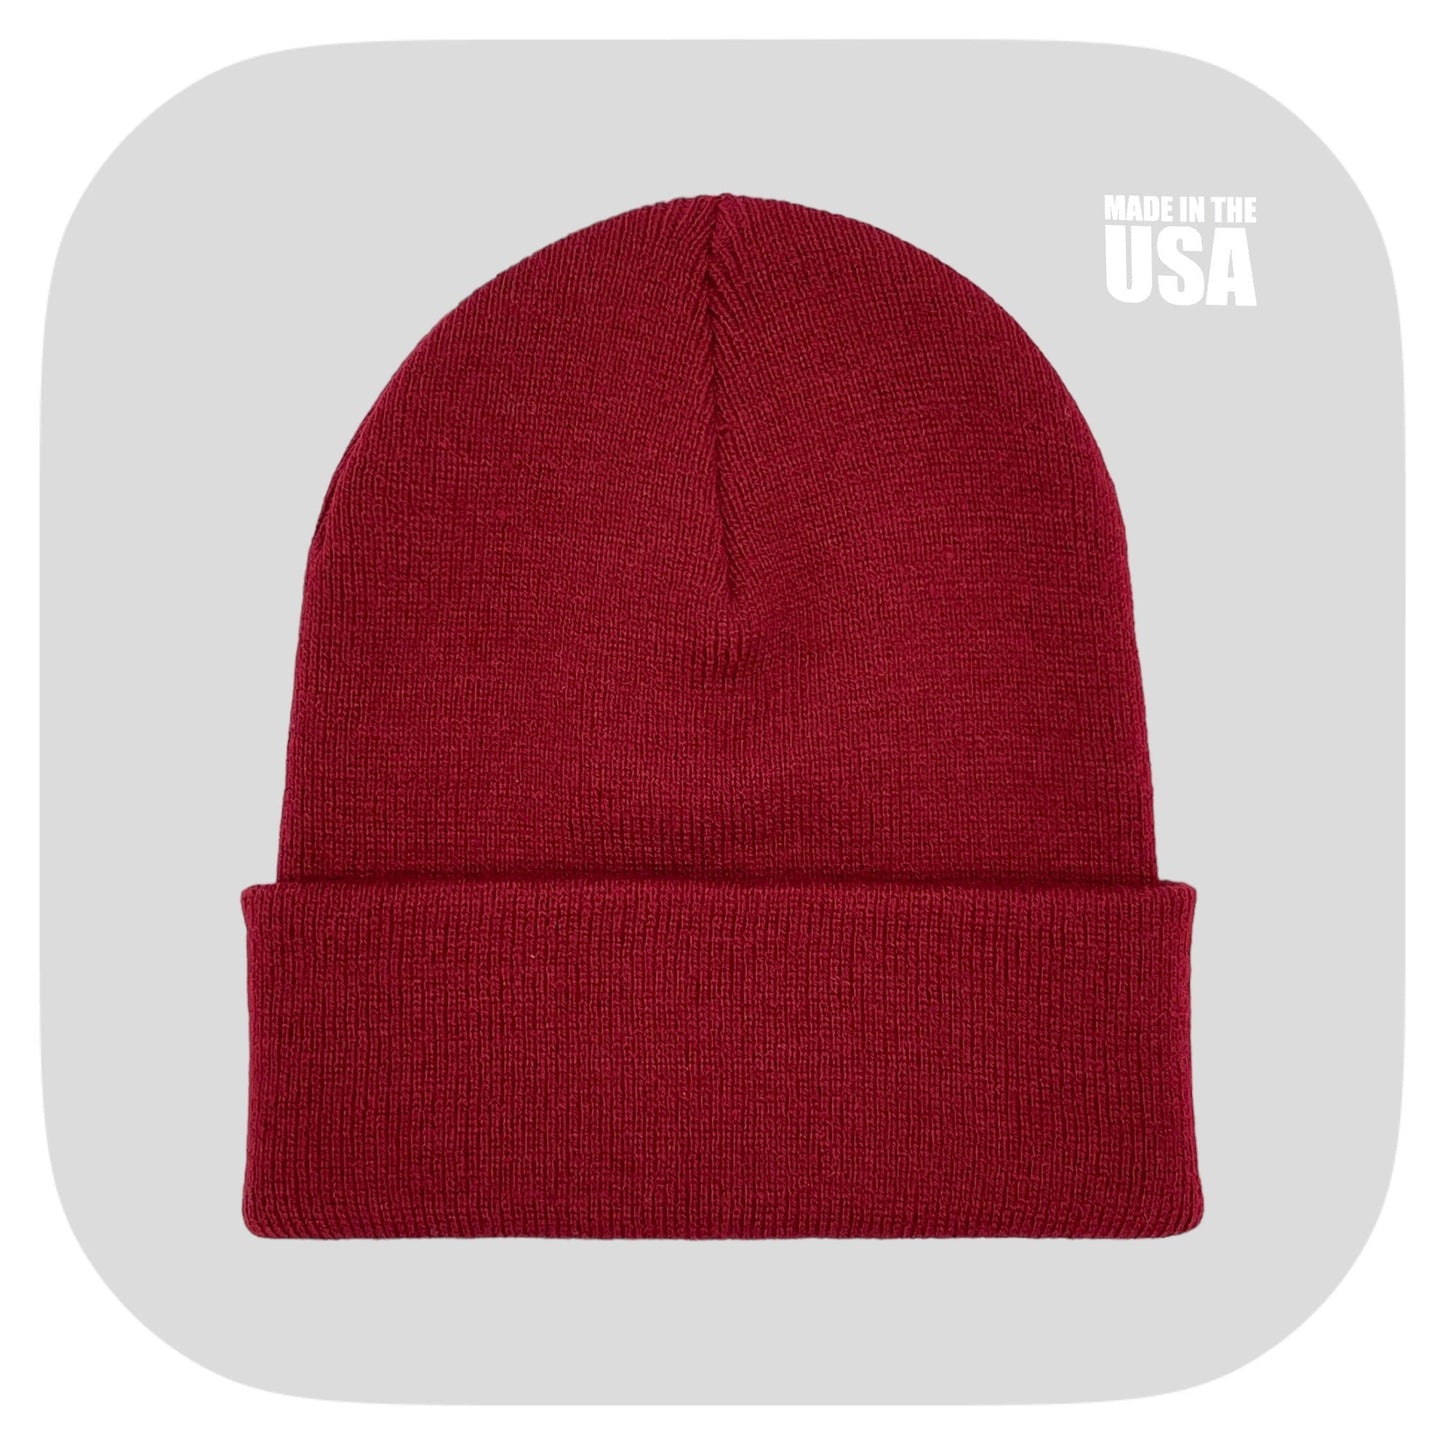 Blank Beanie Factory Cuffed Winter Hat, Wholesale price, Premium Quality, Black, Made in U.S.A - The Beanie Factory